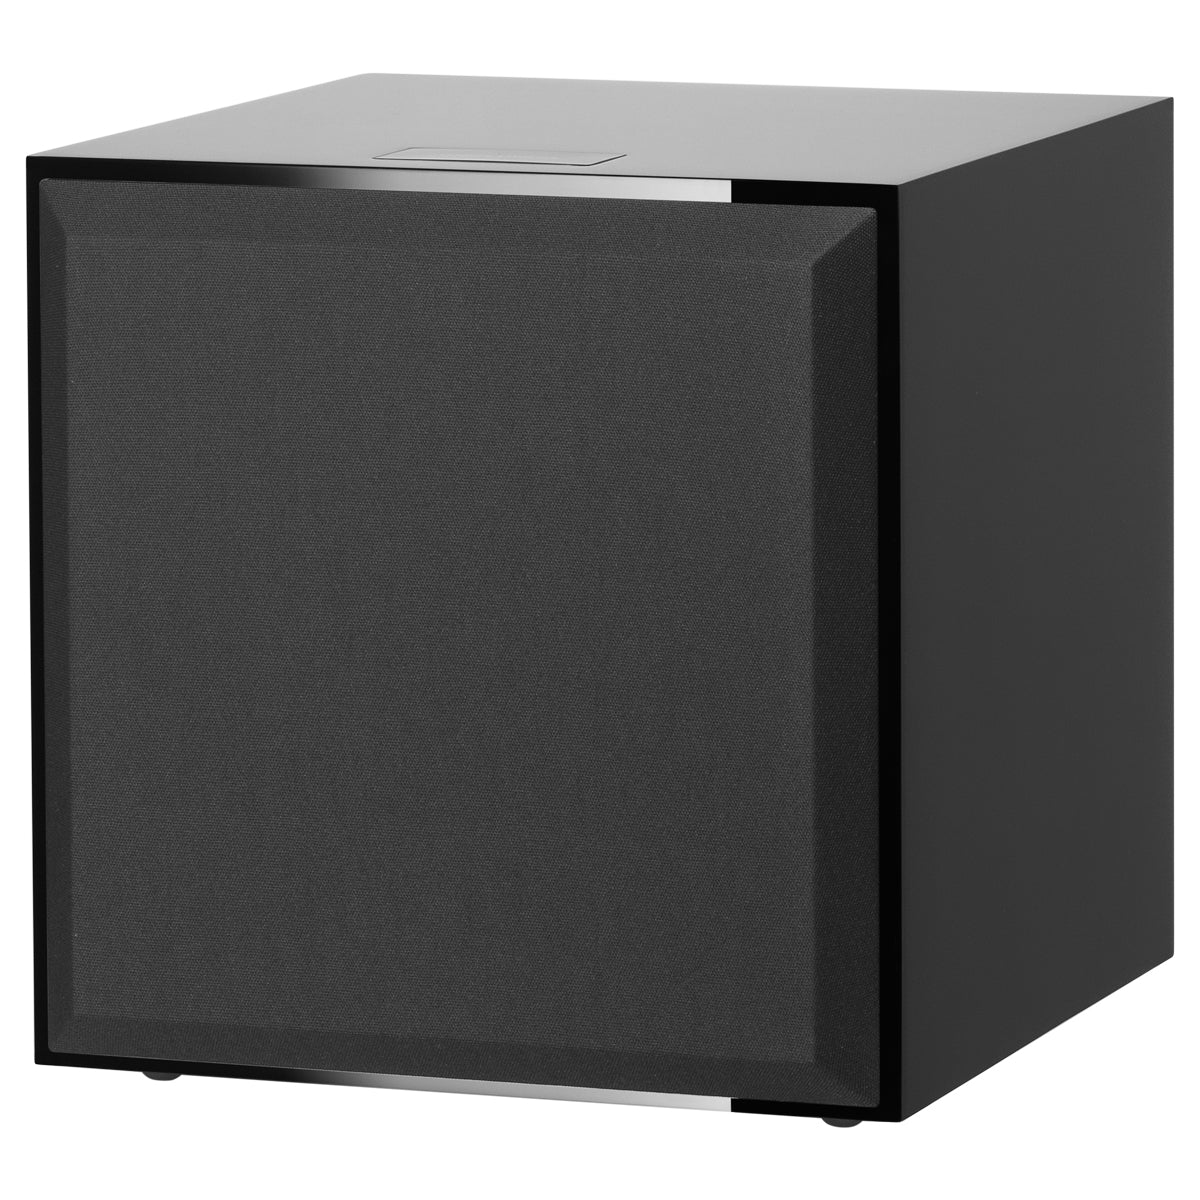 Bowers & Wilkins DB4S 10" Active Subwoofer - Gloss Black - The Audio Experts